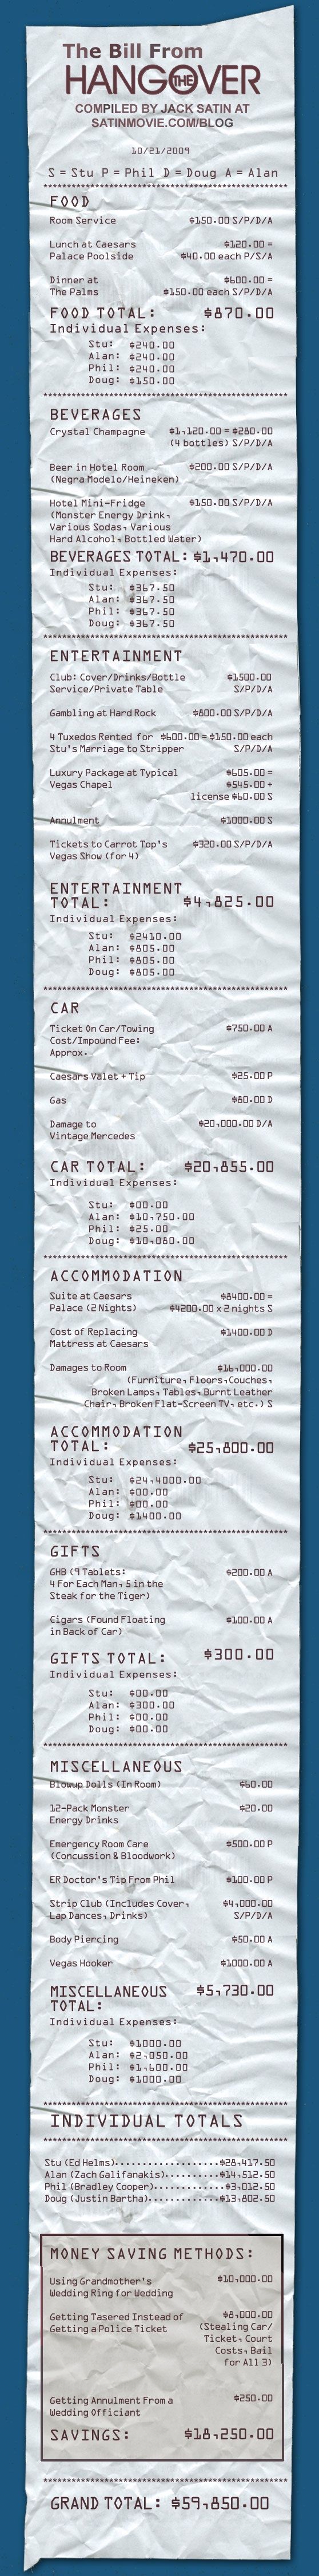 The bill from The Hangover (Compiled by Jack Satin)